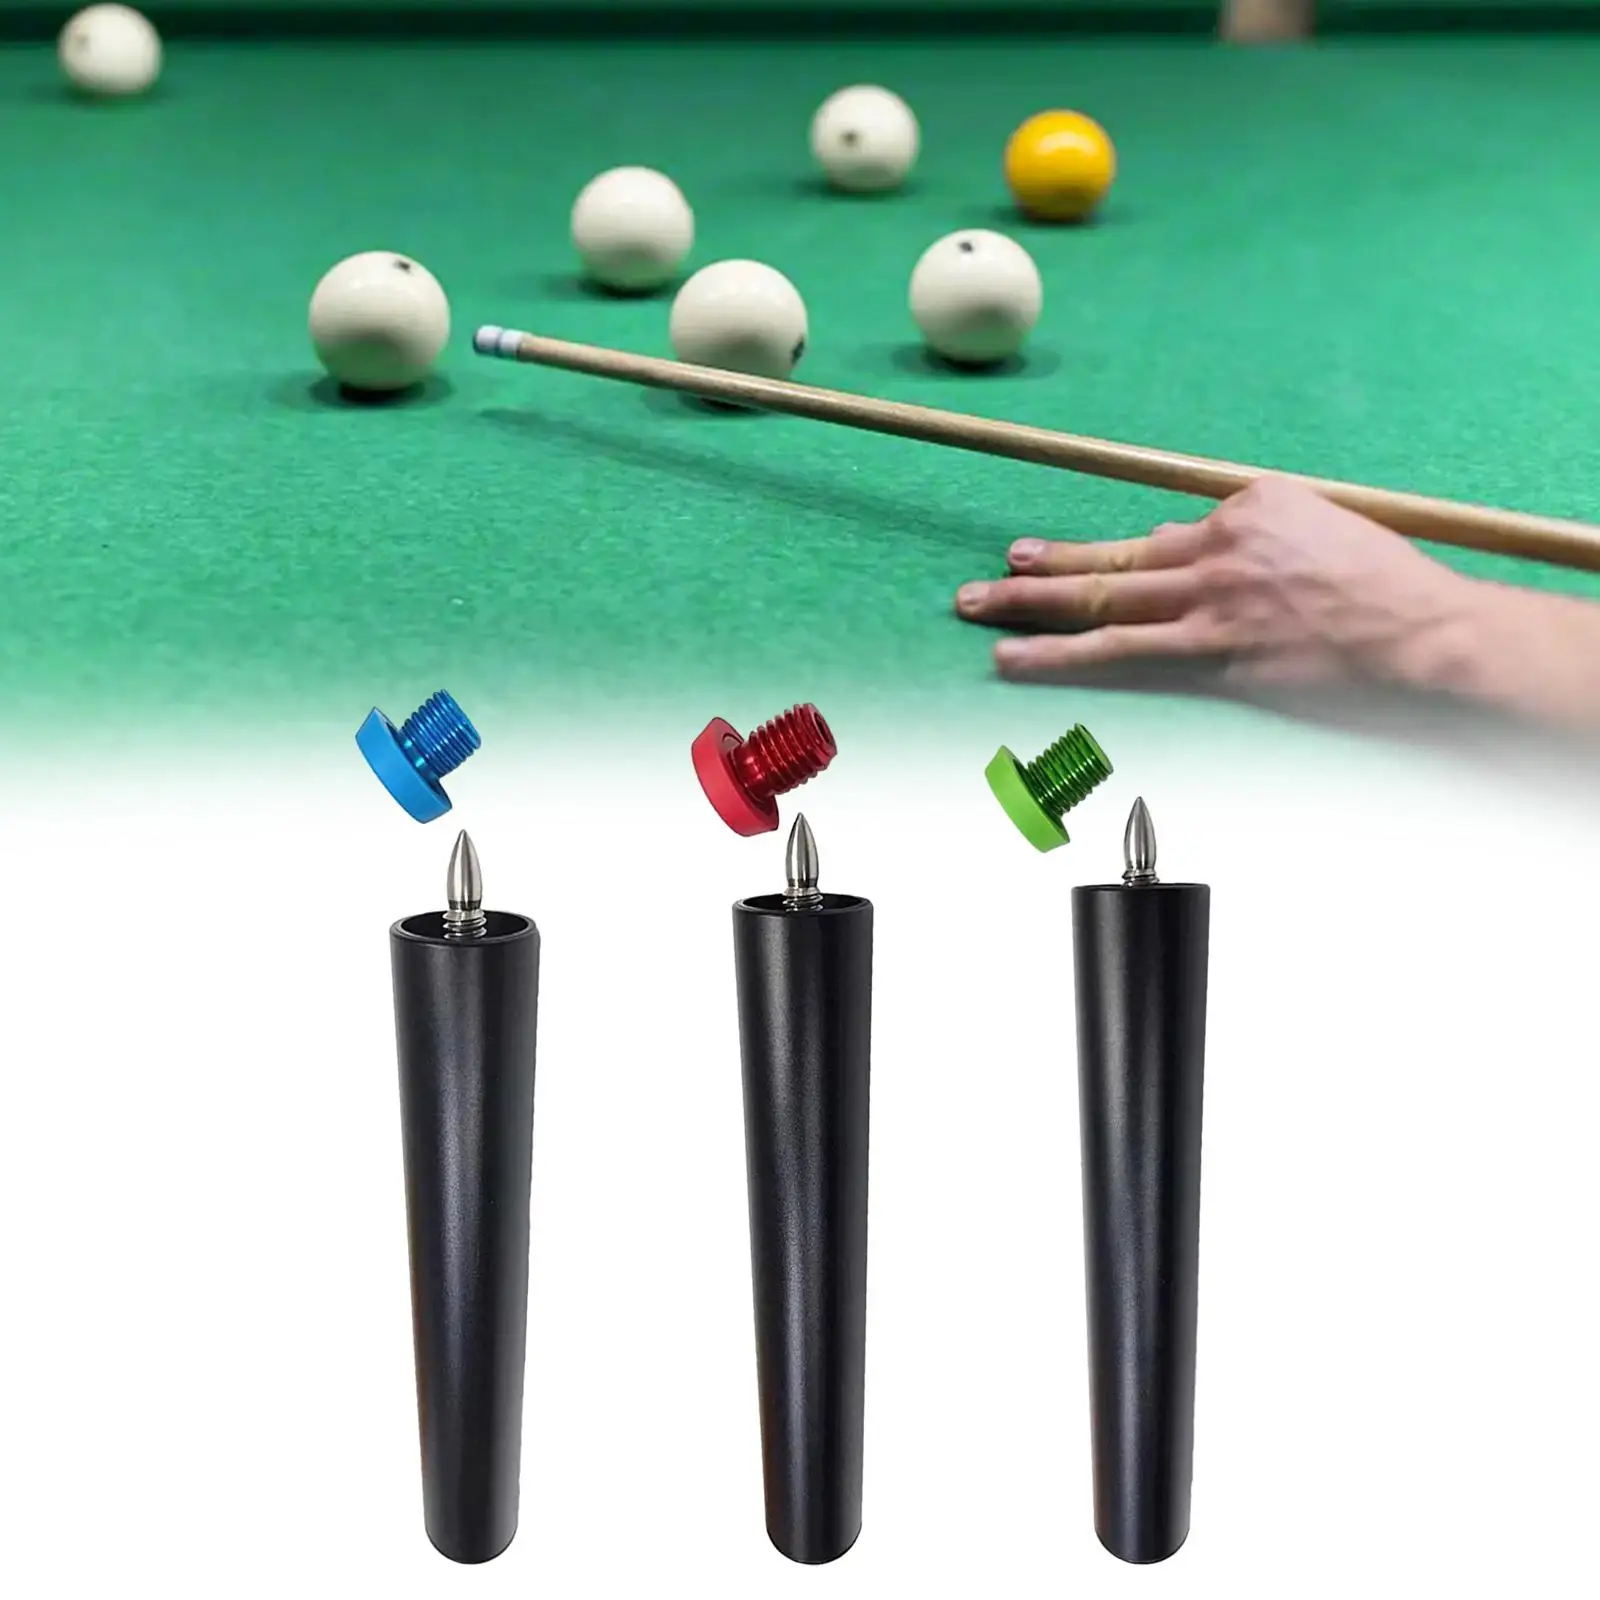 Pool Cue Extender Billiards Pool Cue Extension Lightweight Cue Lengthener for Snooker Athlete Enthusiast Billiard Cues Accessory